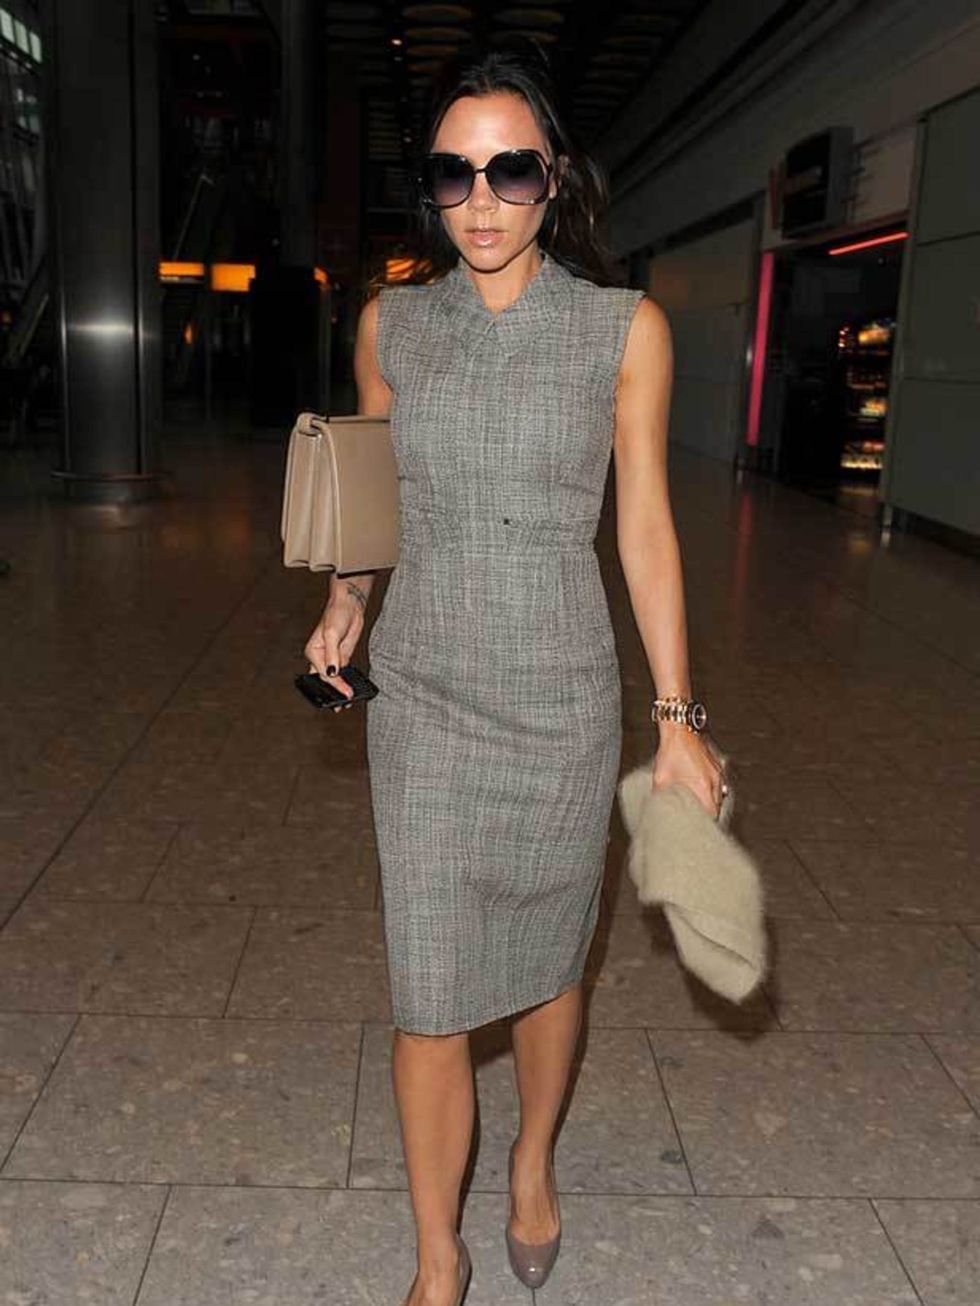 <p><a href="http://www.elleuk.com/starstyle/style-files/%28section%29/victoria-beckham">Victoria Beckham</a> wearing autumn winter 2010 <a href="http://www.elleuk.com/catwalk/collections/marc-jacobs/autumn-winter-2010/review">Marc Jacobs</a> with one of h